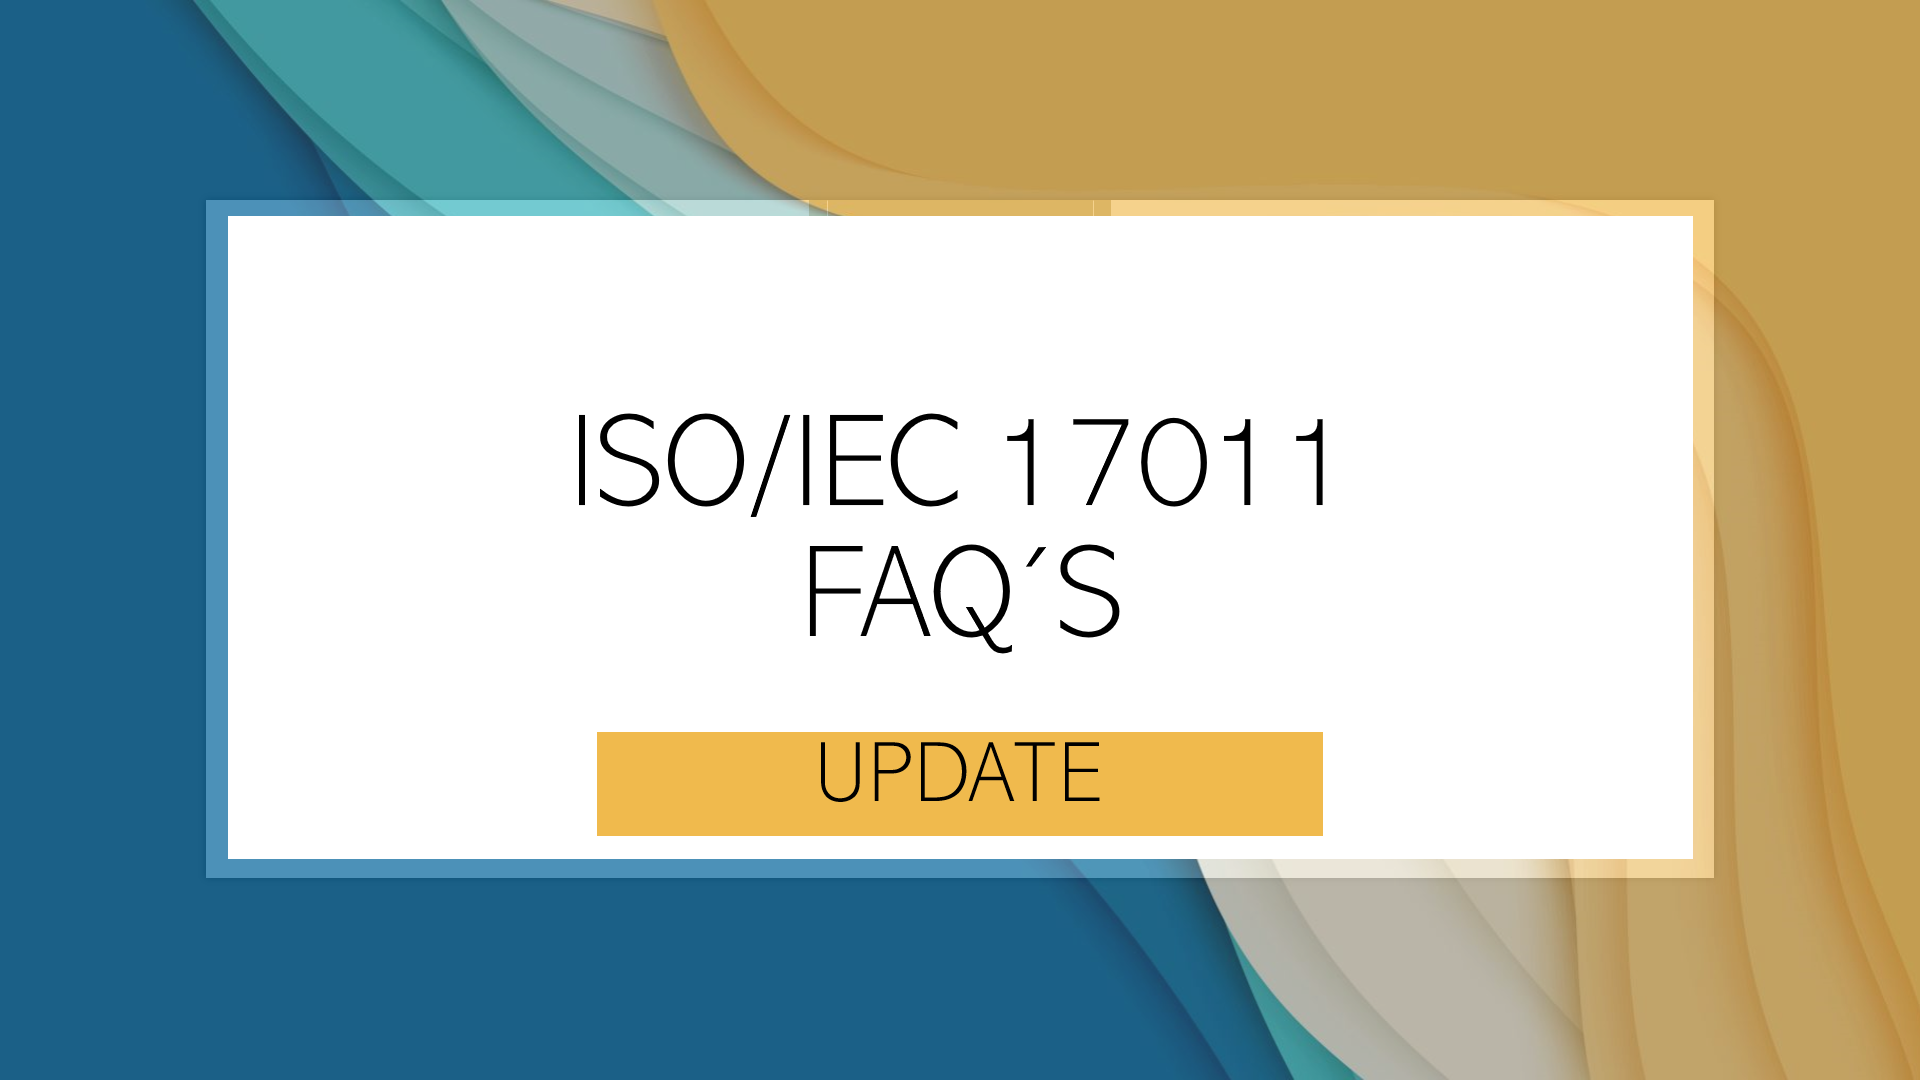 FREQUENTLY ASKED QUESTIONS AND ANSWERS ABOUT ISO / IEC 17011 (UPDATE)